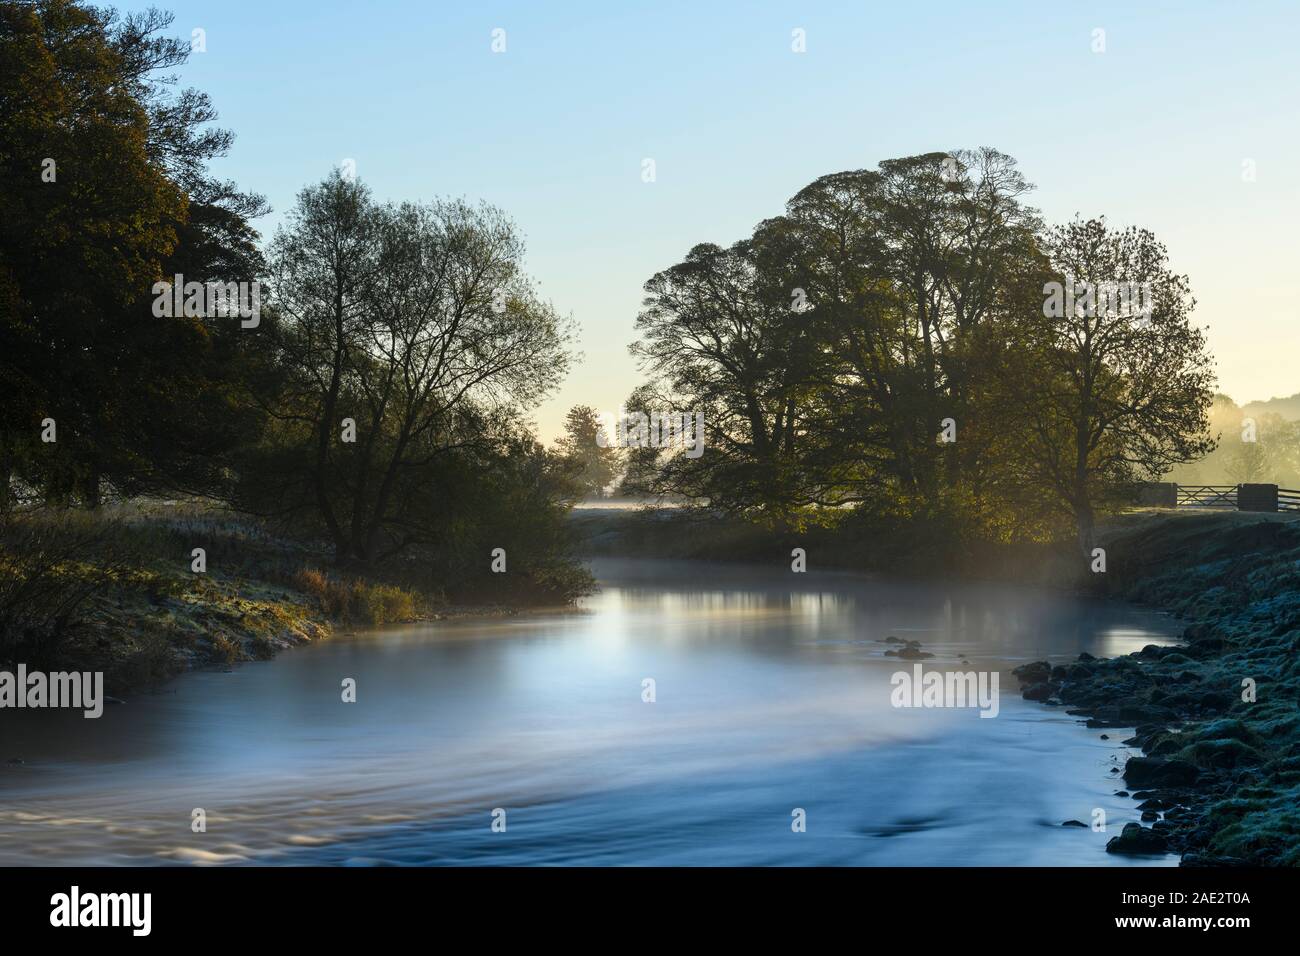 Cold early morning sunrise in scenic countryside, mist or fog lying over water of River Wharfe - Burley in Wharfedale, West Yorkshire, England, UK. Stock Photo